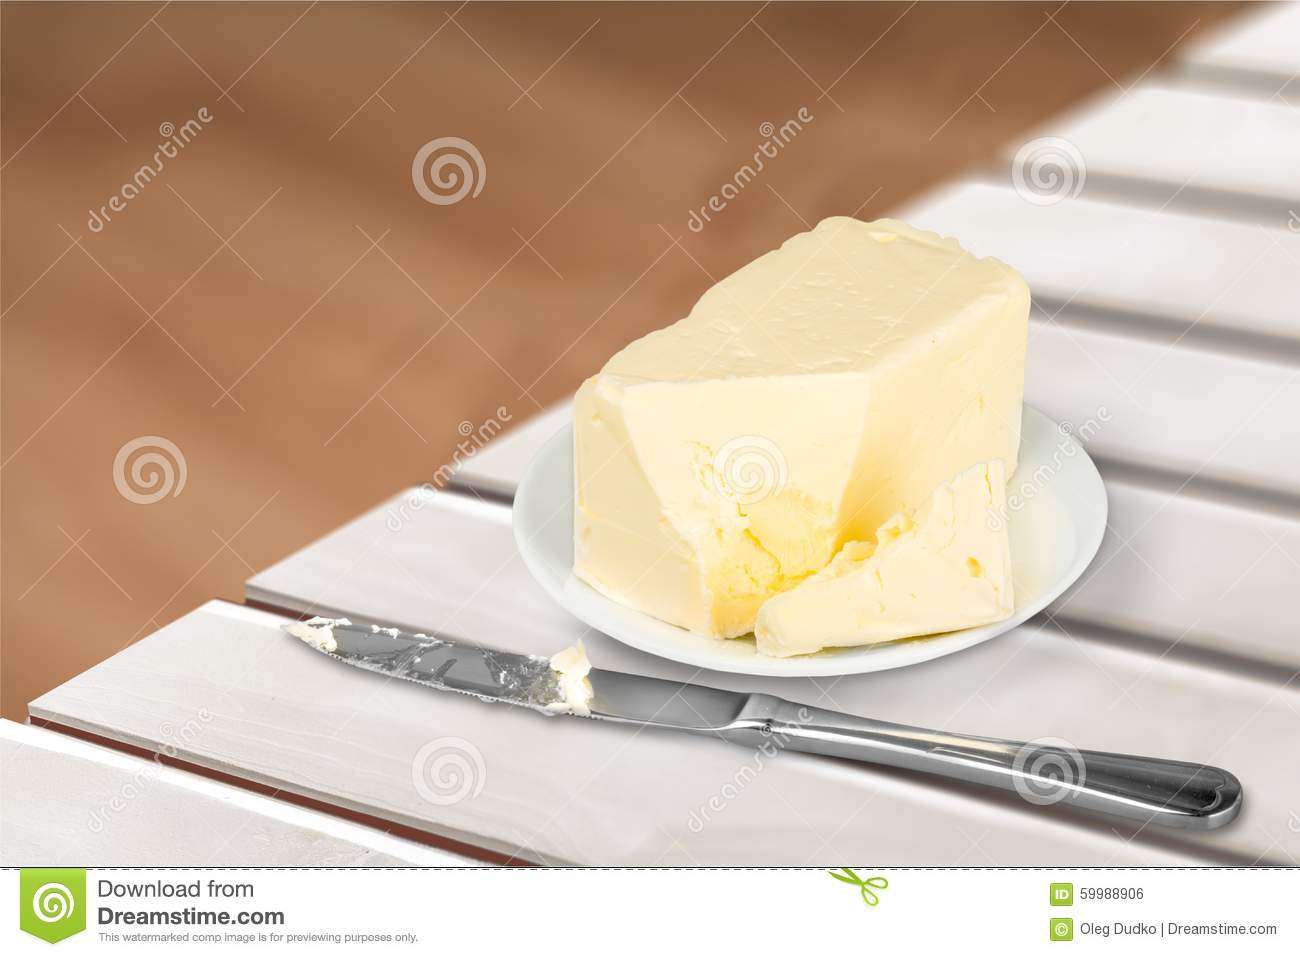 Butter stock photo. Image of cholesterol, unhealthy ...